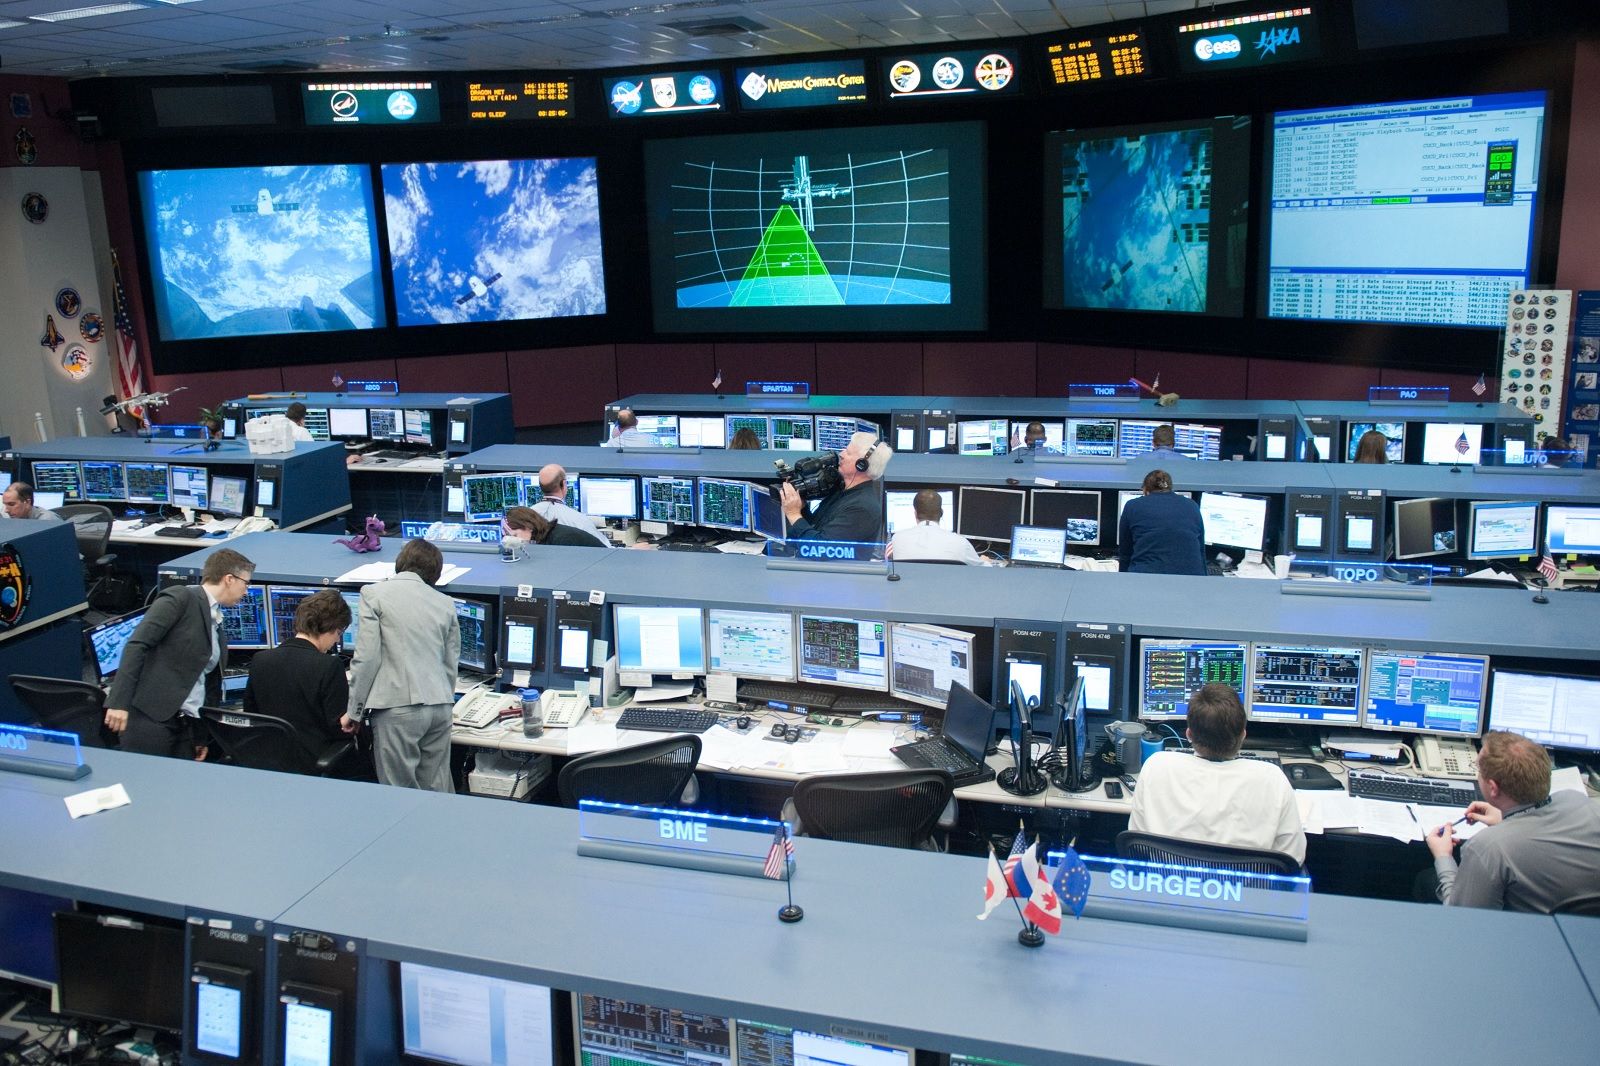 Satisfying Photos Of Classic Control Rooms That Once Ran The World image 13